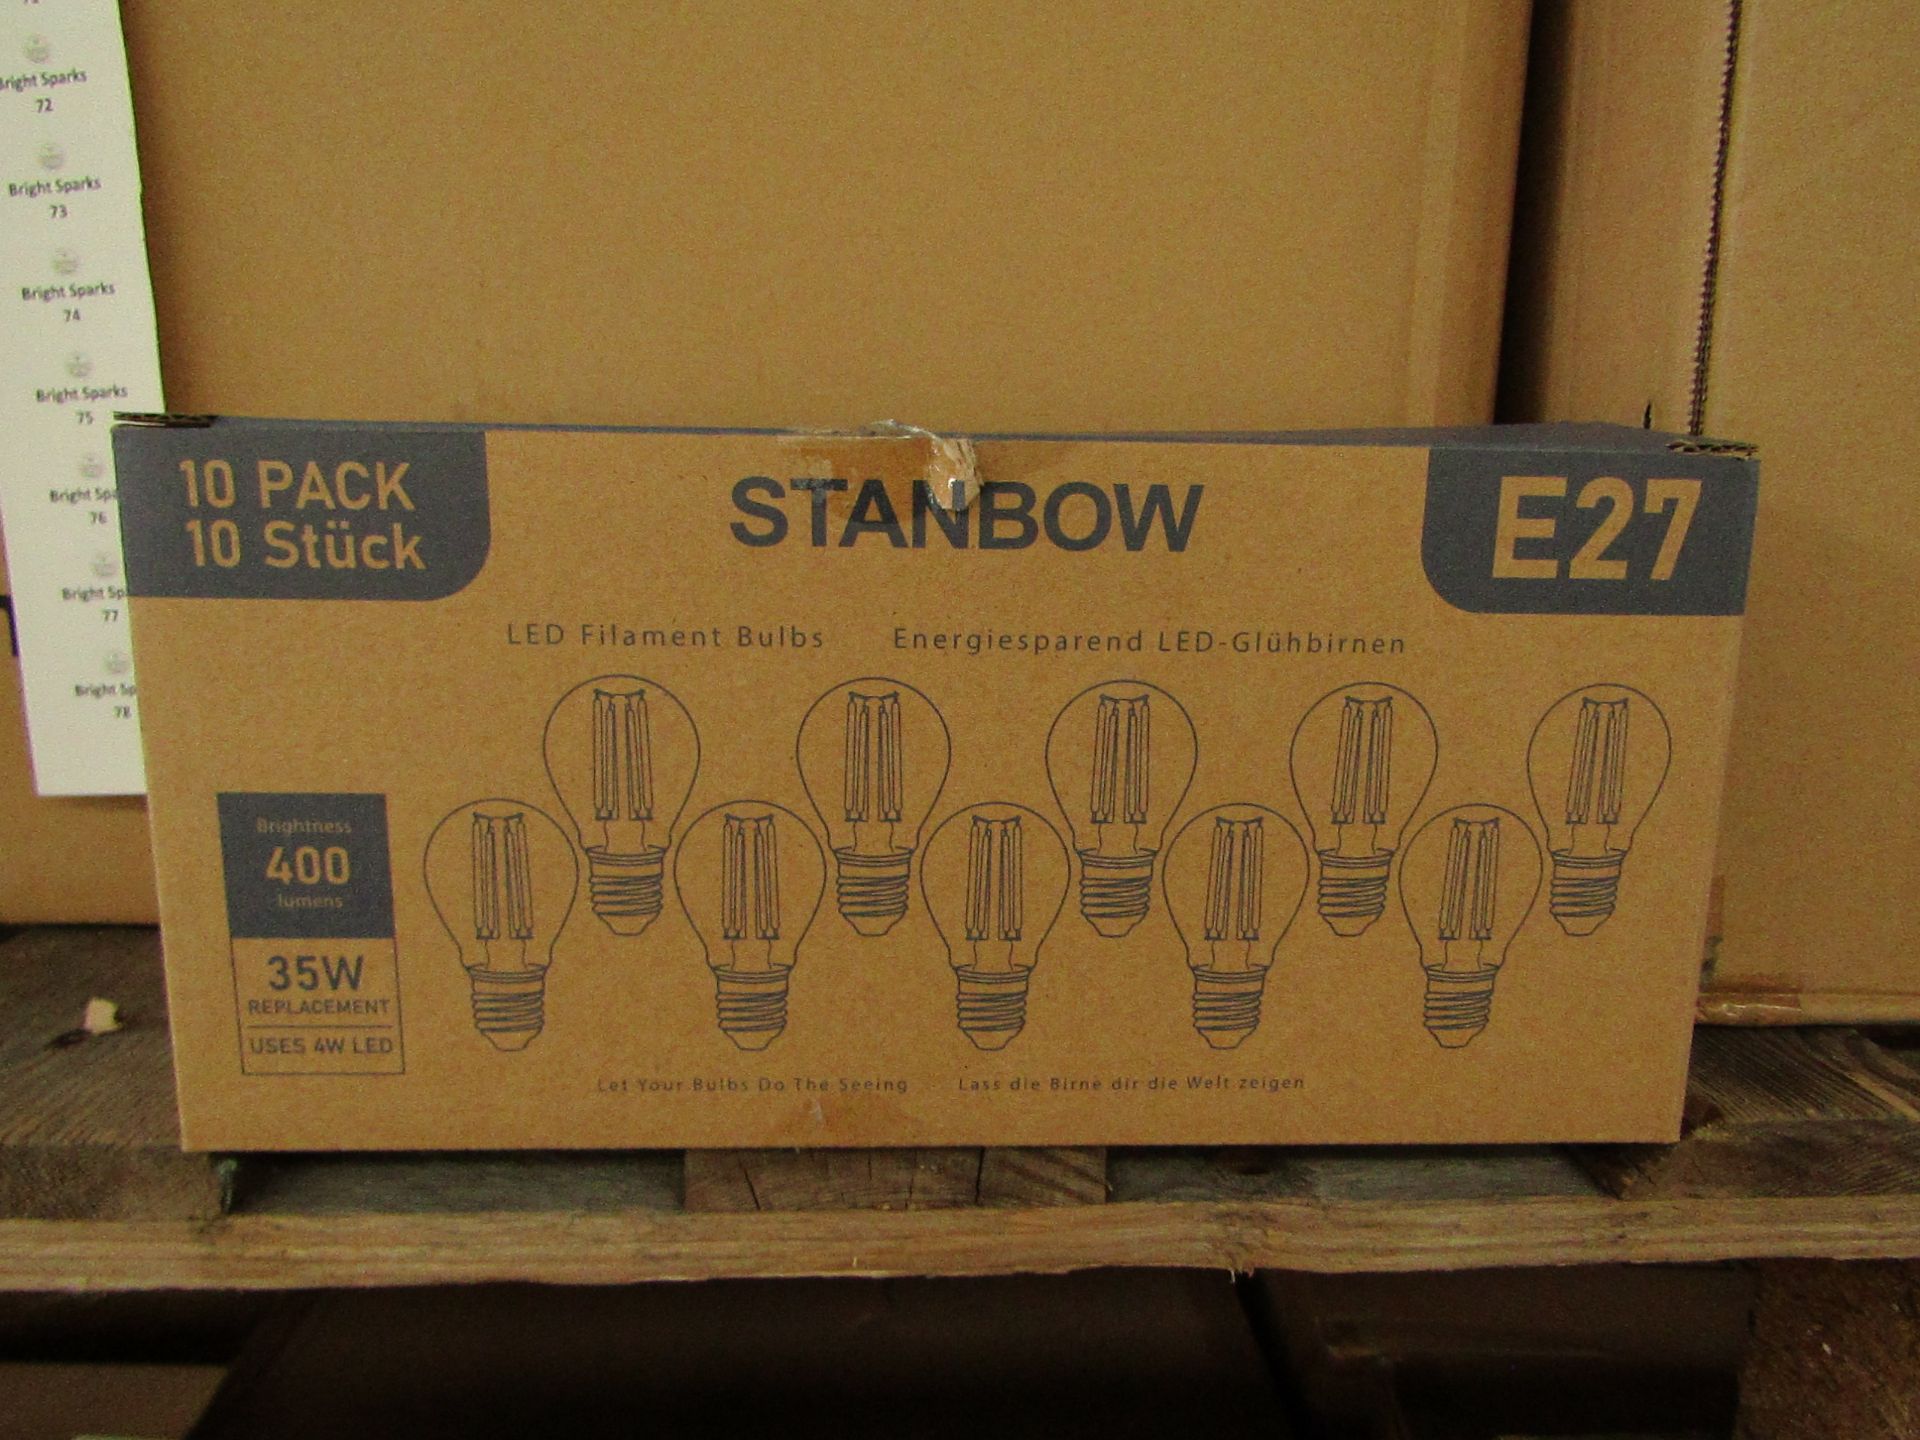 20x Packs of 10 Stanbow E27 4w L˜ED filament light bulbs, new and boxed